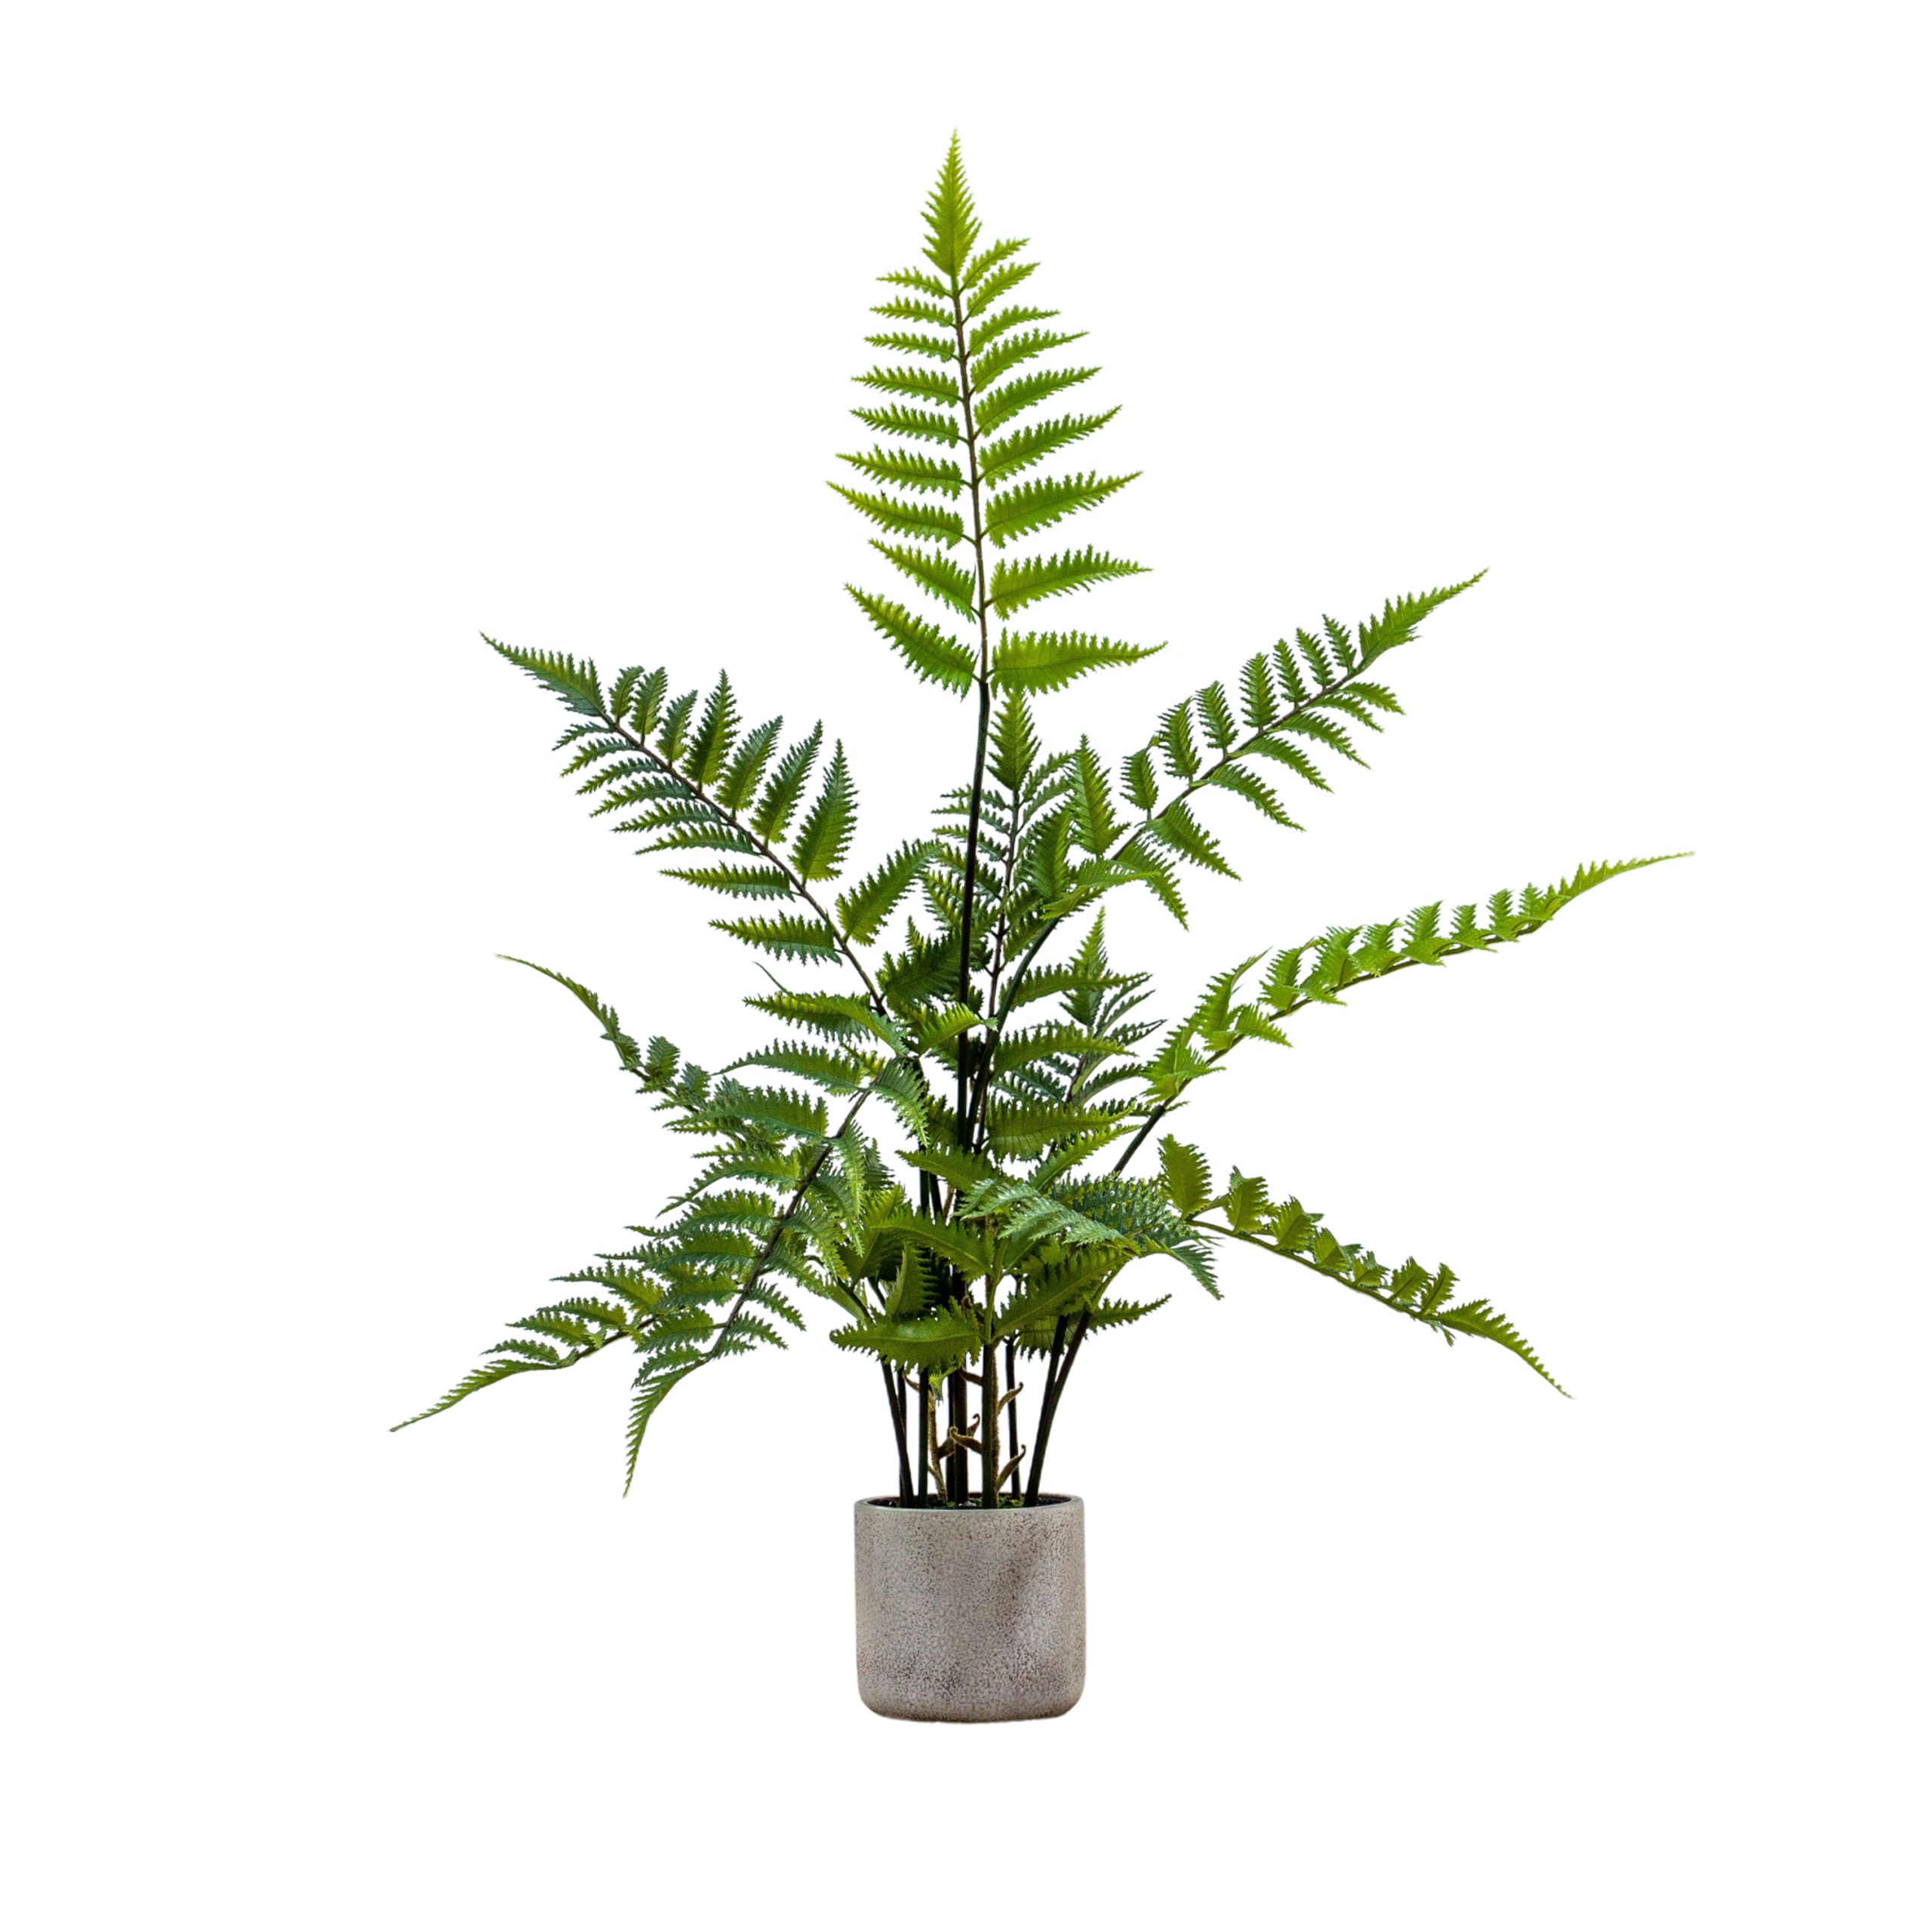 Gallery Direct Potted Fern in Cement Pot